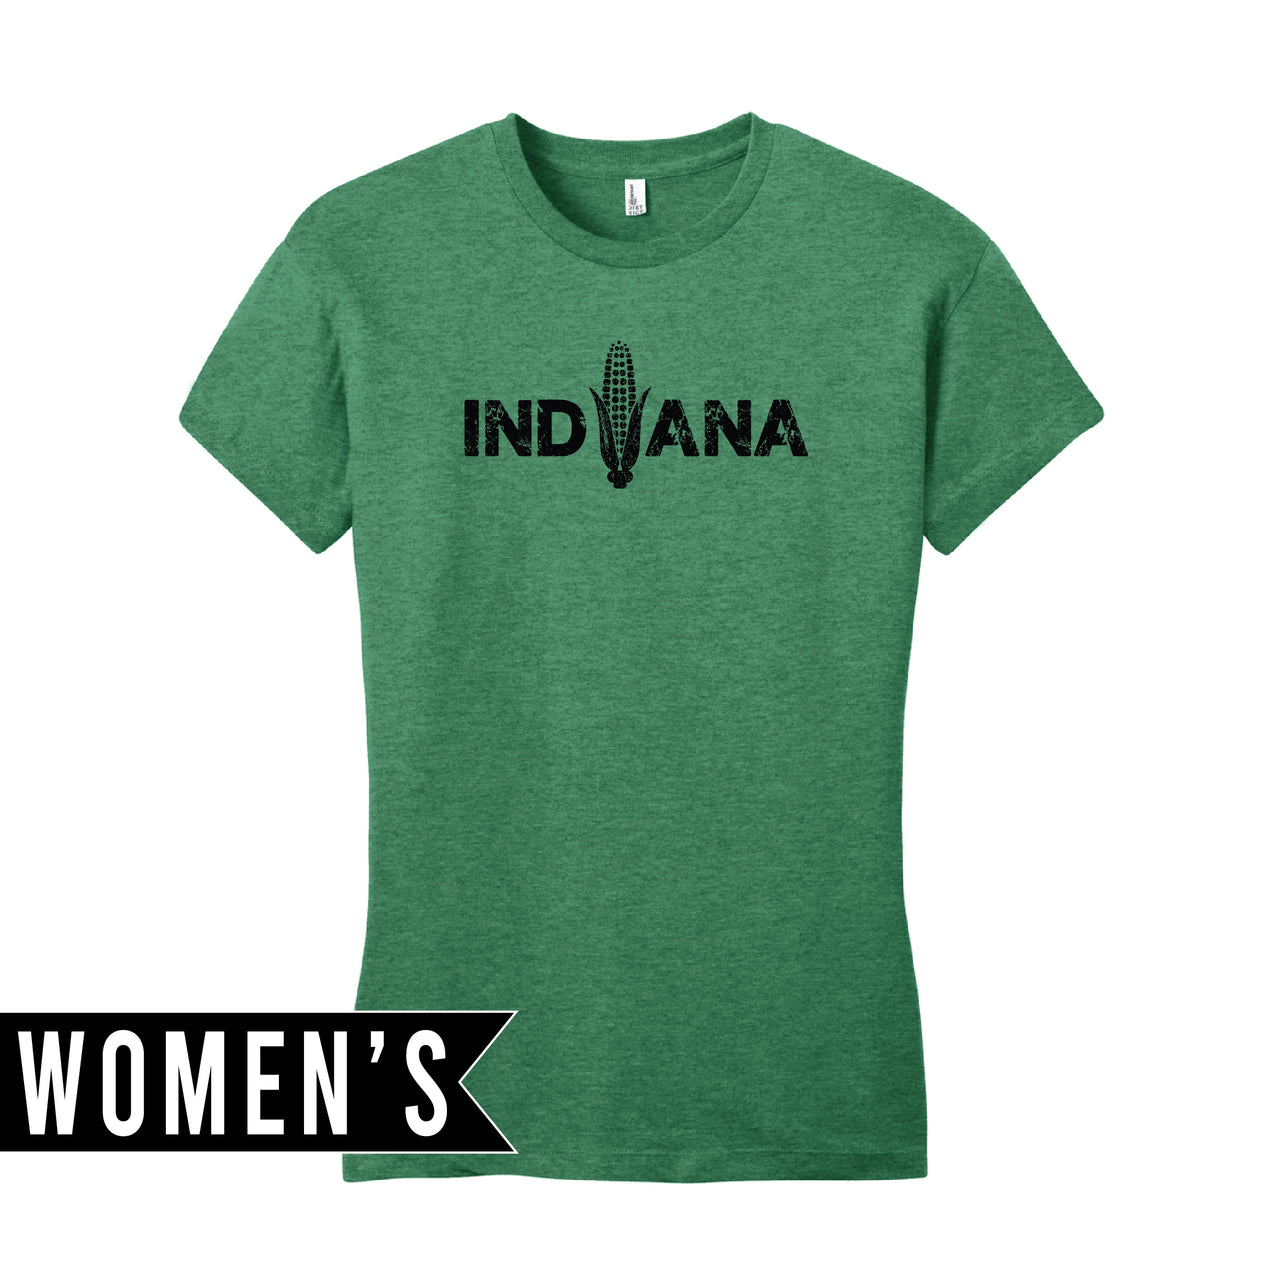 Women’s Fitted T-Shirt - Indiana Corn